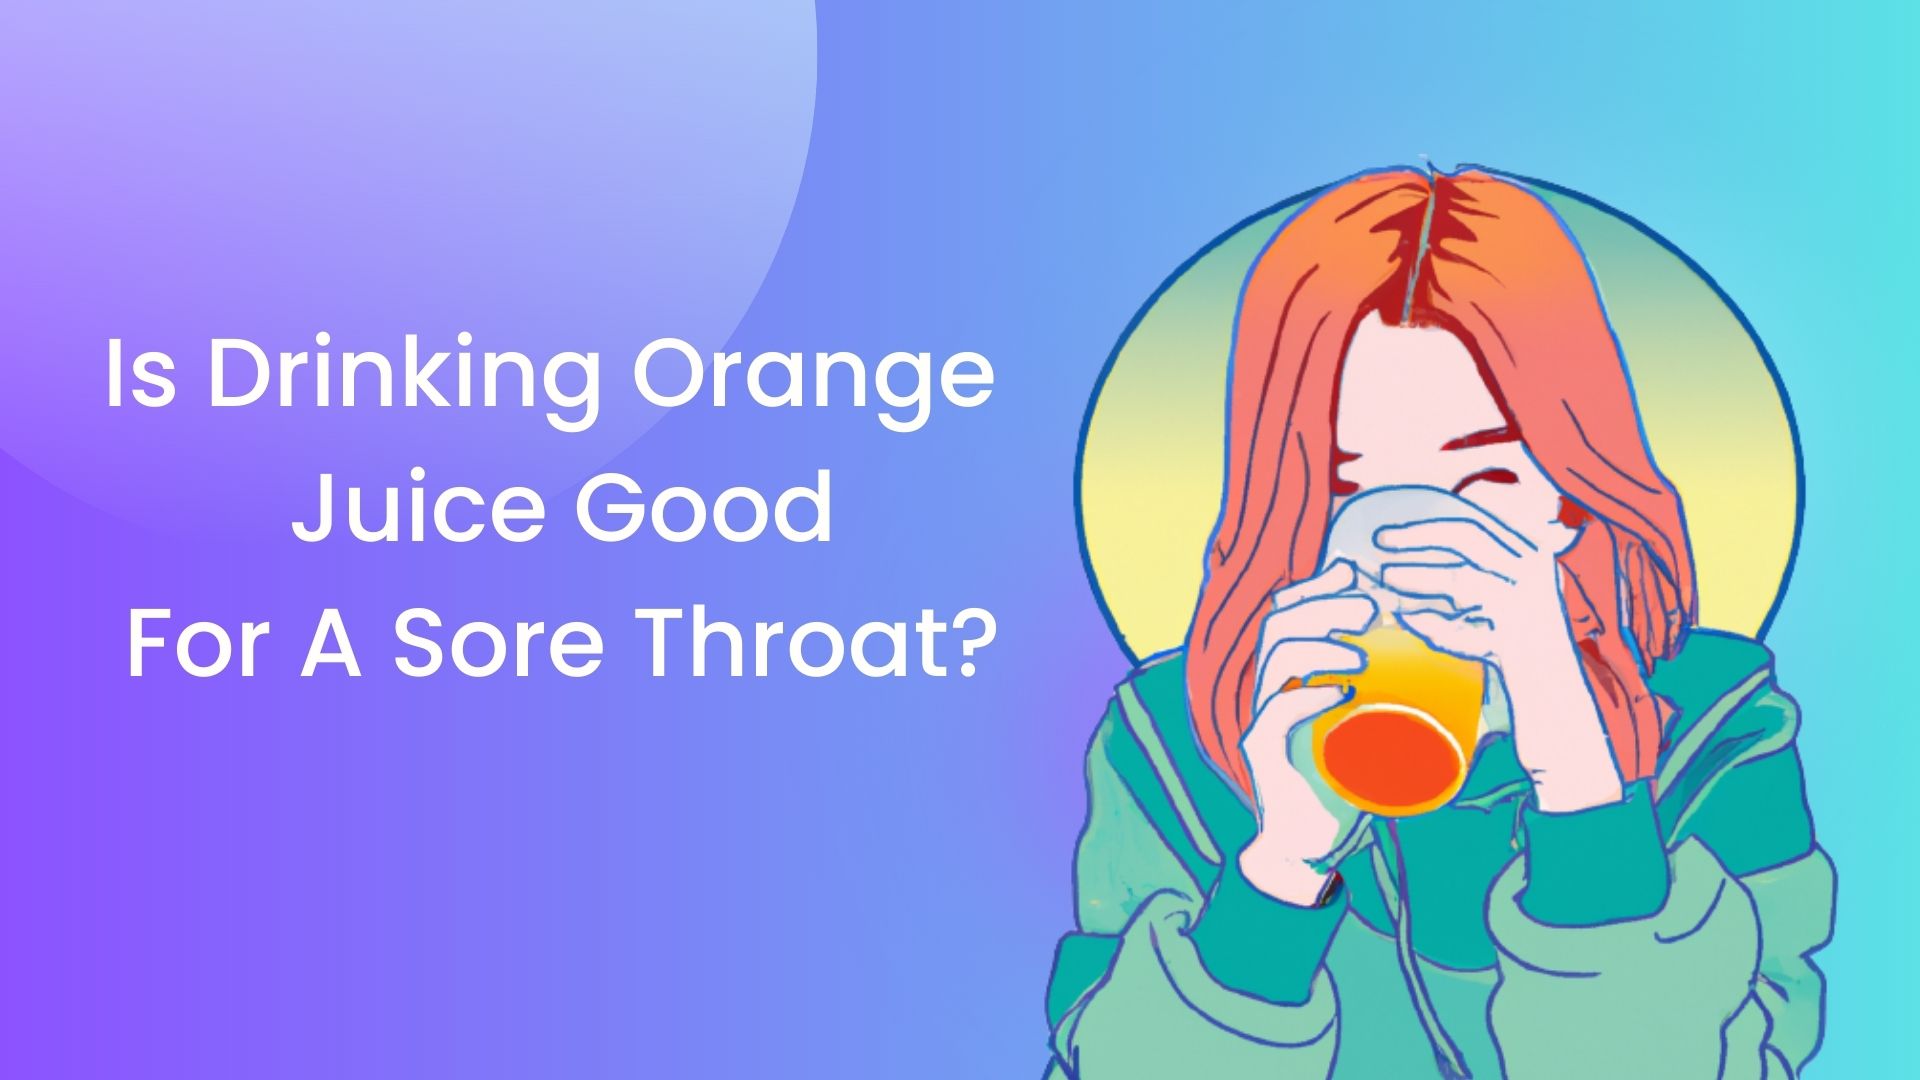 Can You Drink Orange Juice If You Have Throat?